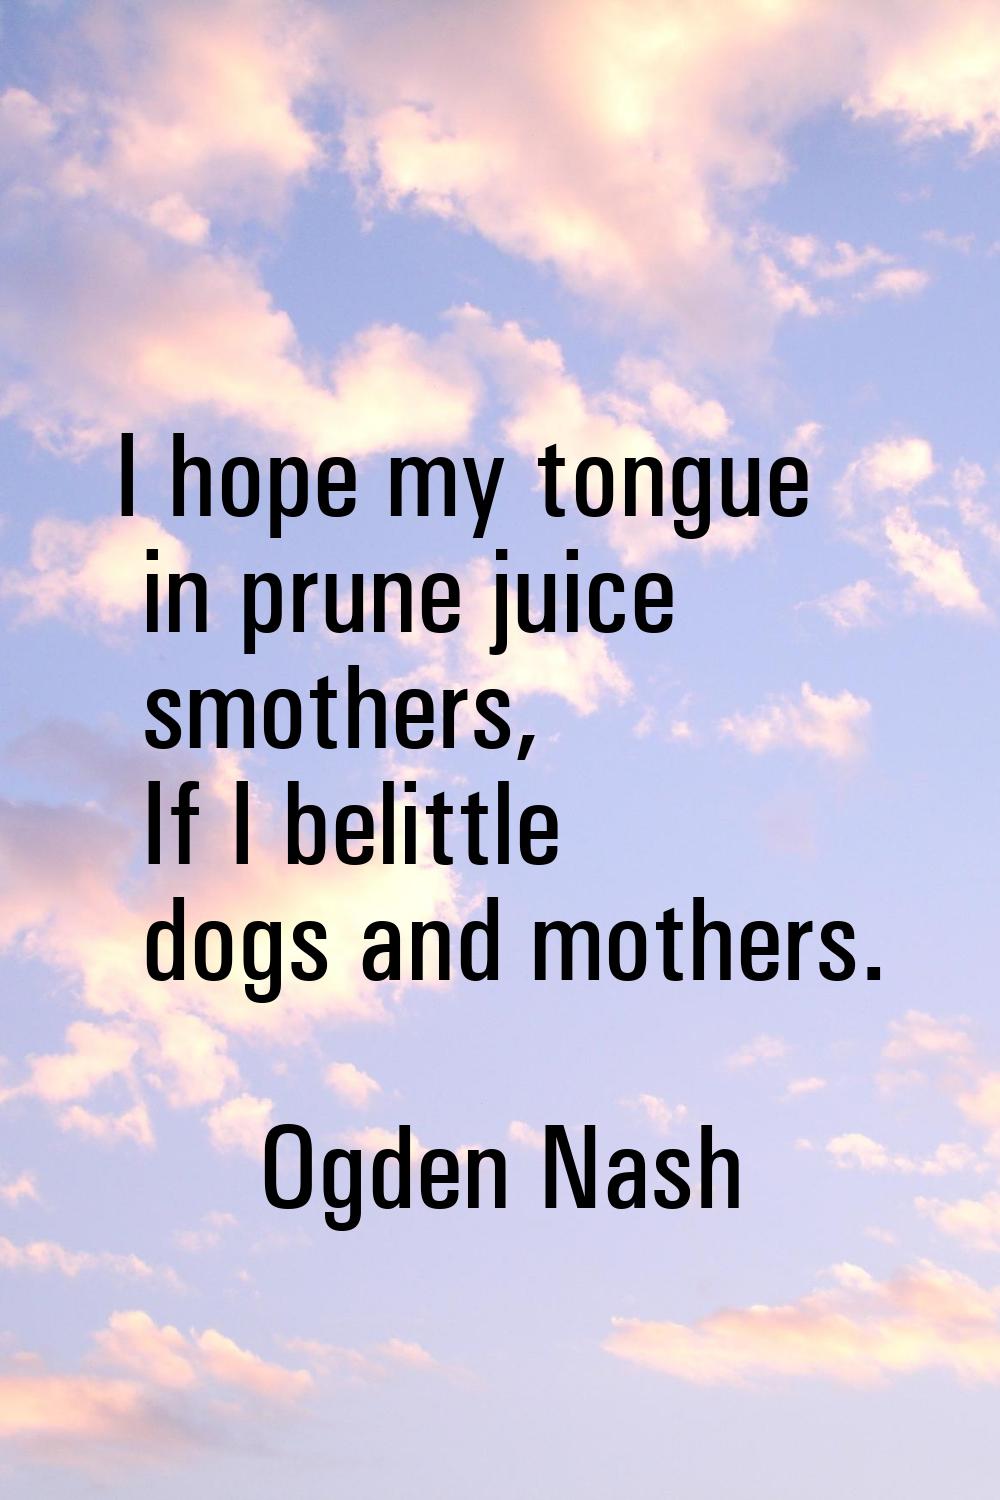 I hope my tongue in prune juice smothers, If I belittle dogs and mothers.